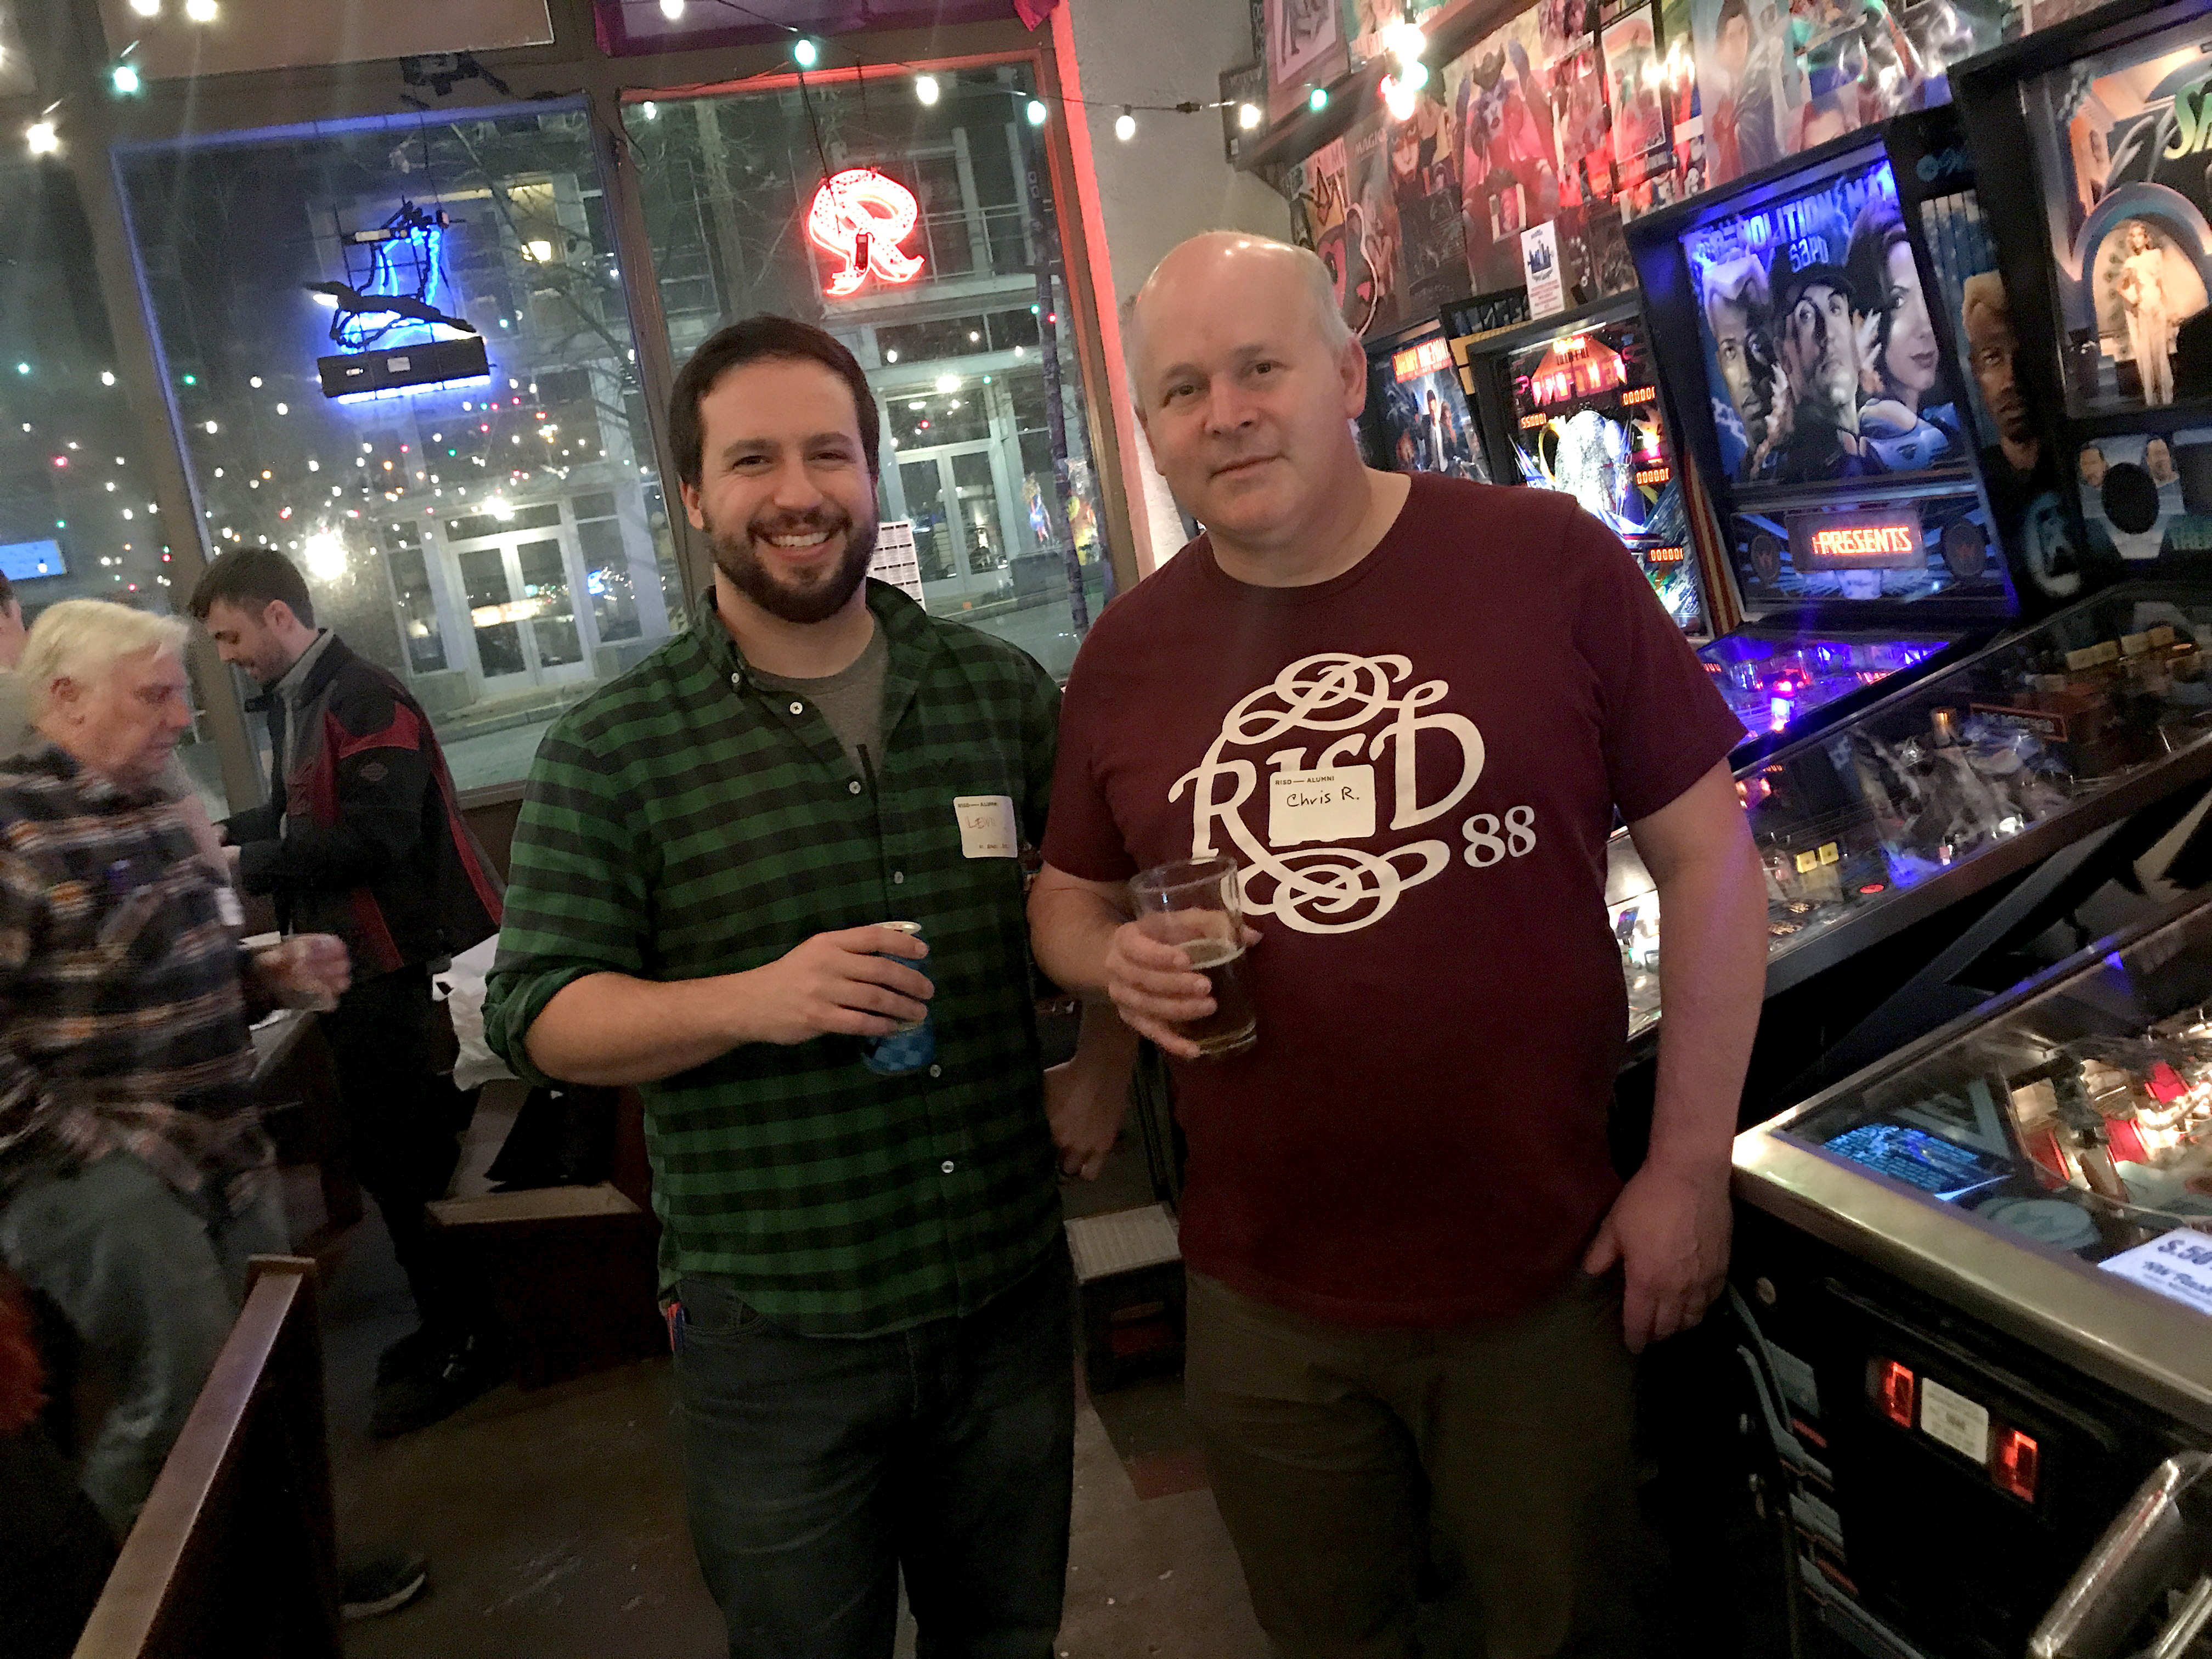 Two men standing in front of pinball machines